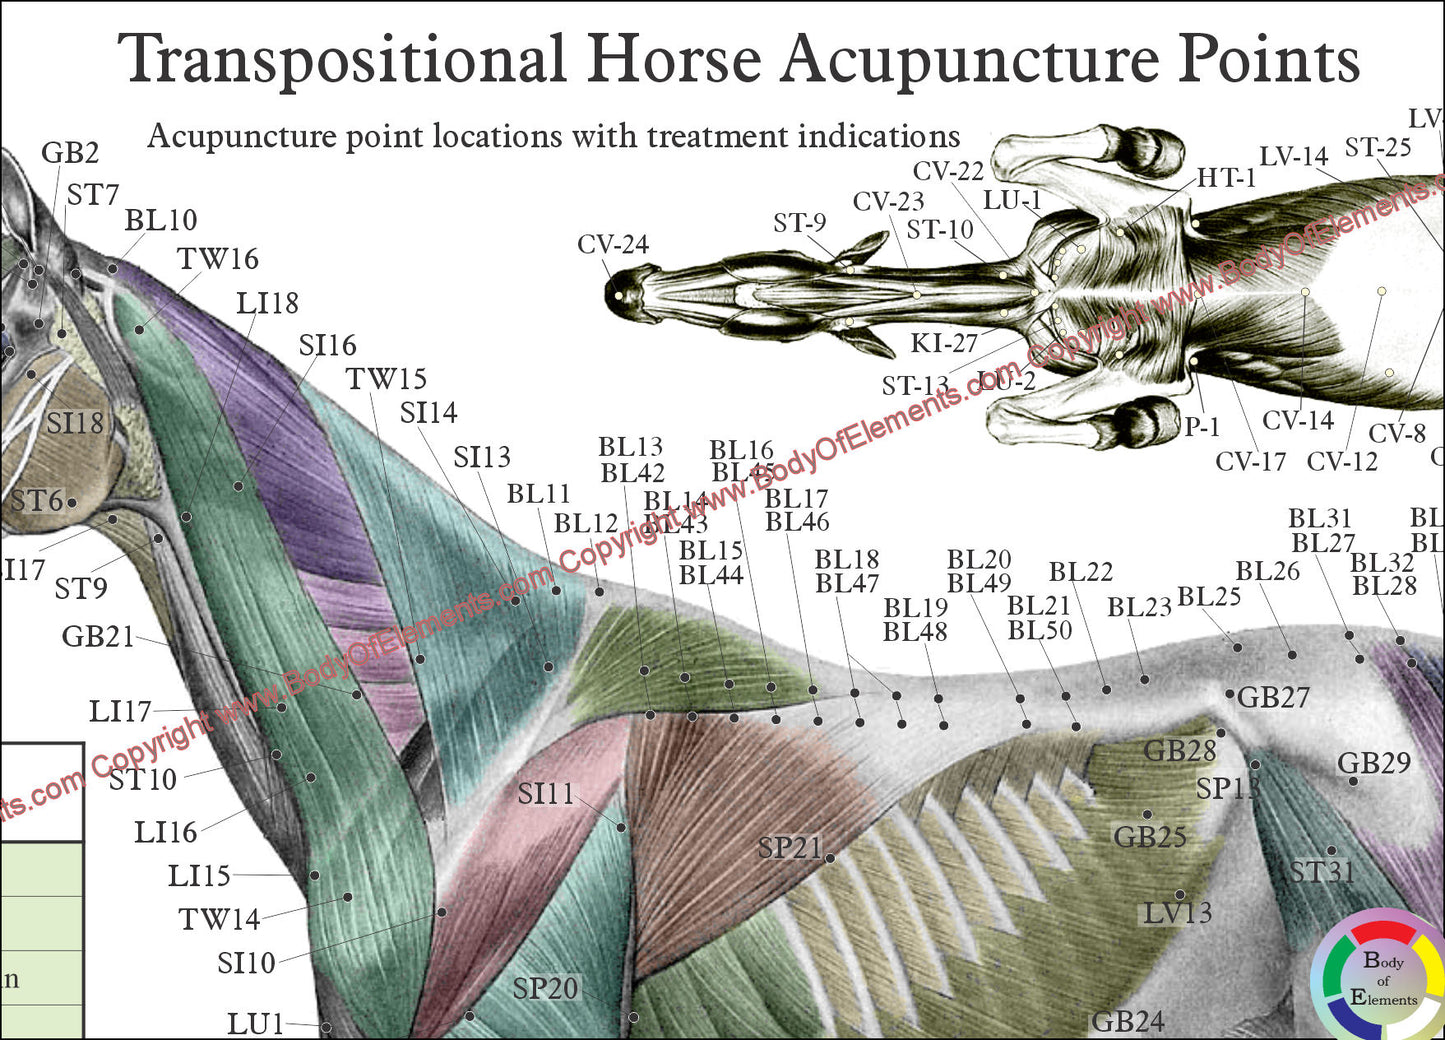 Horse acupuncture point locations